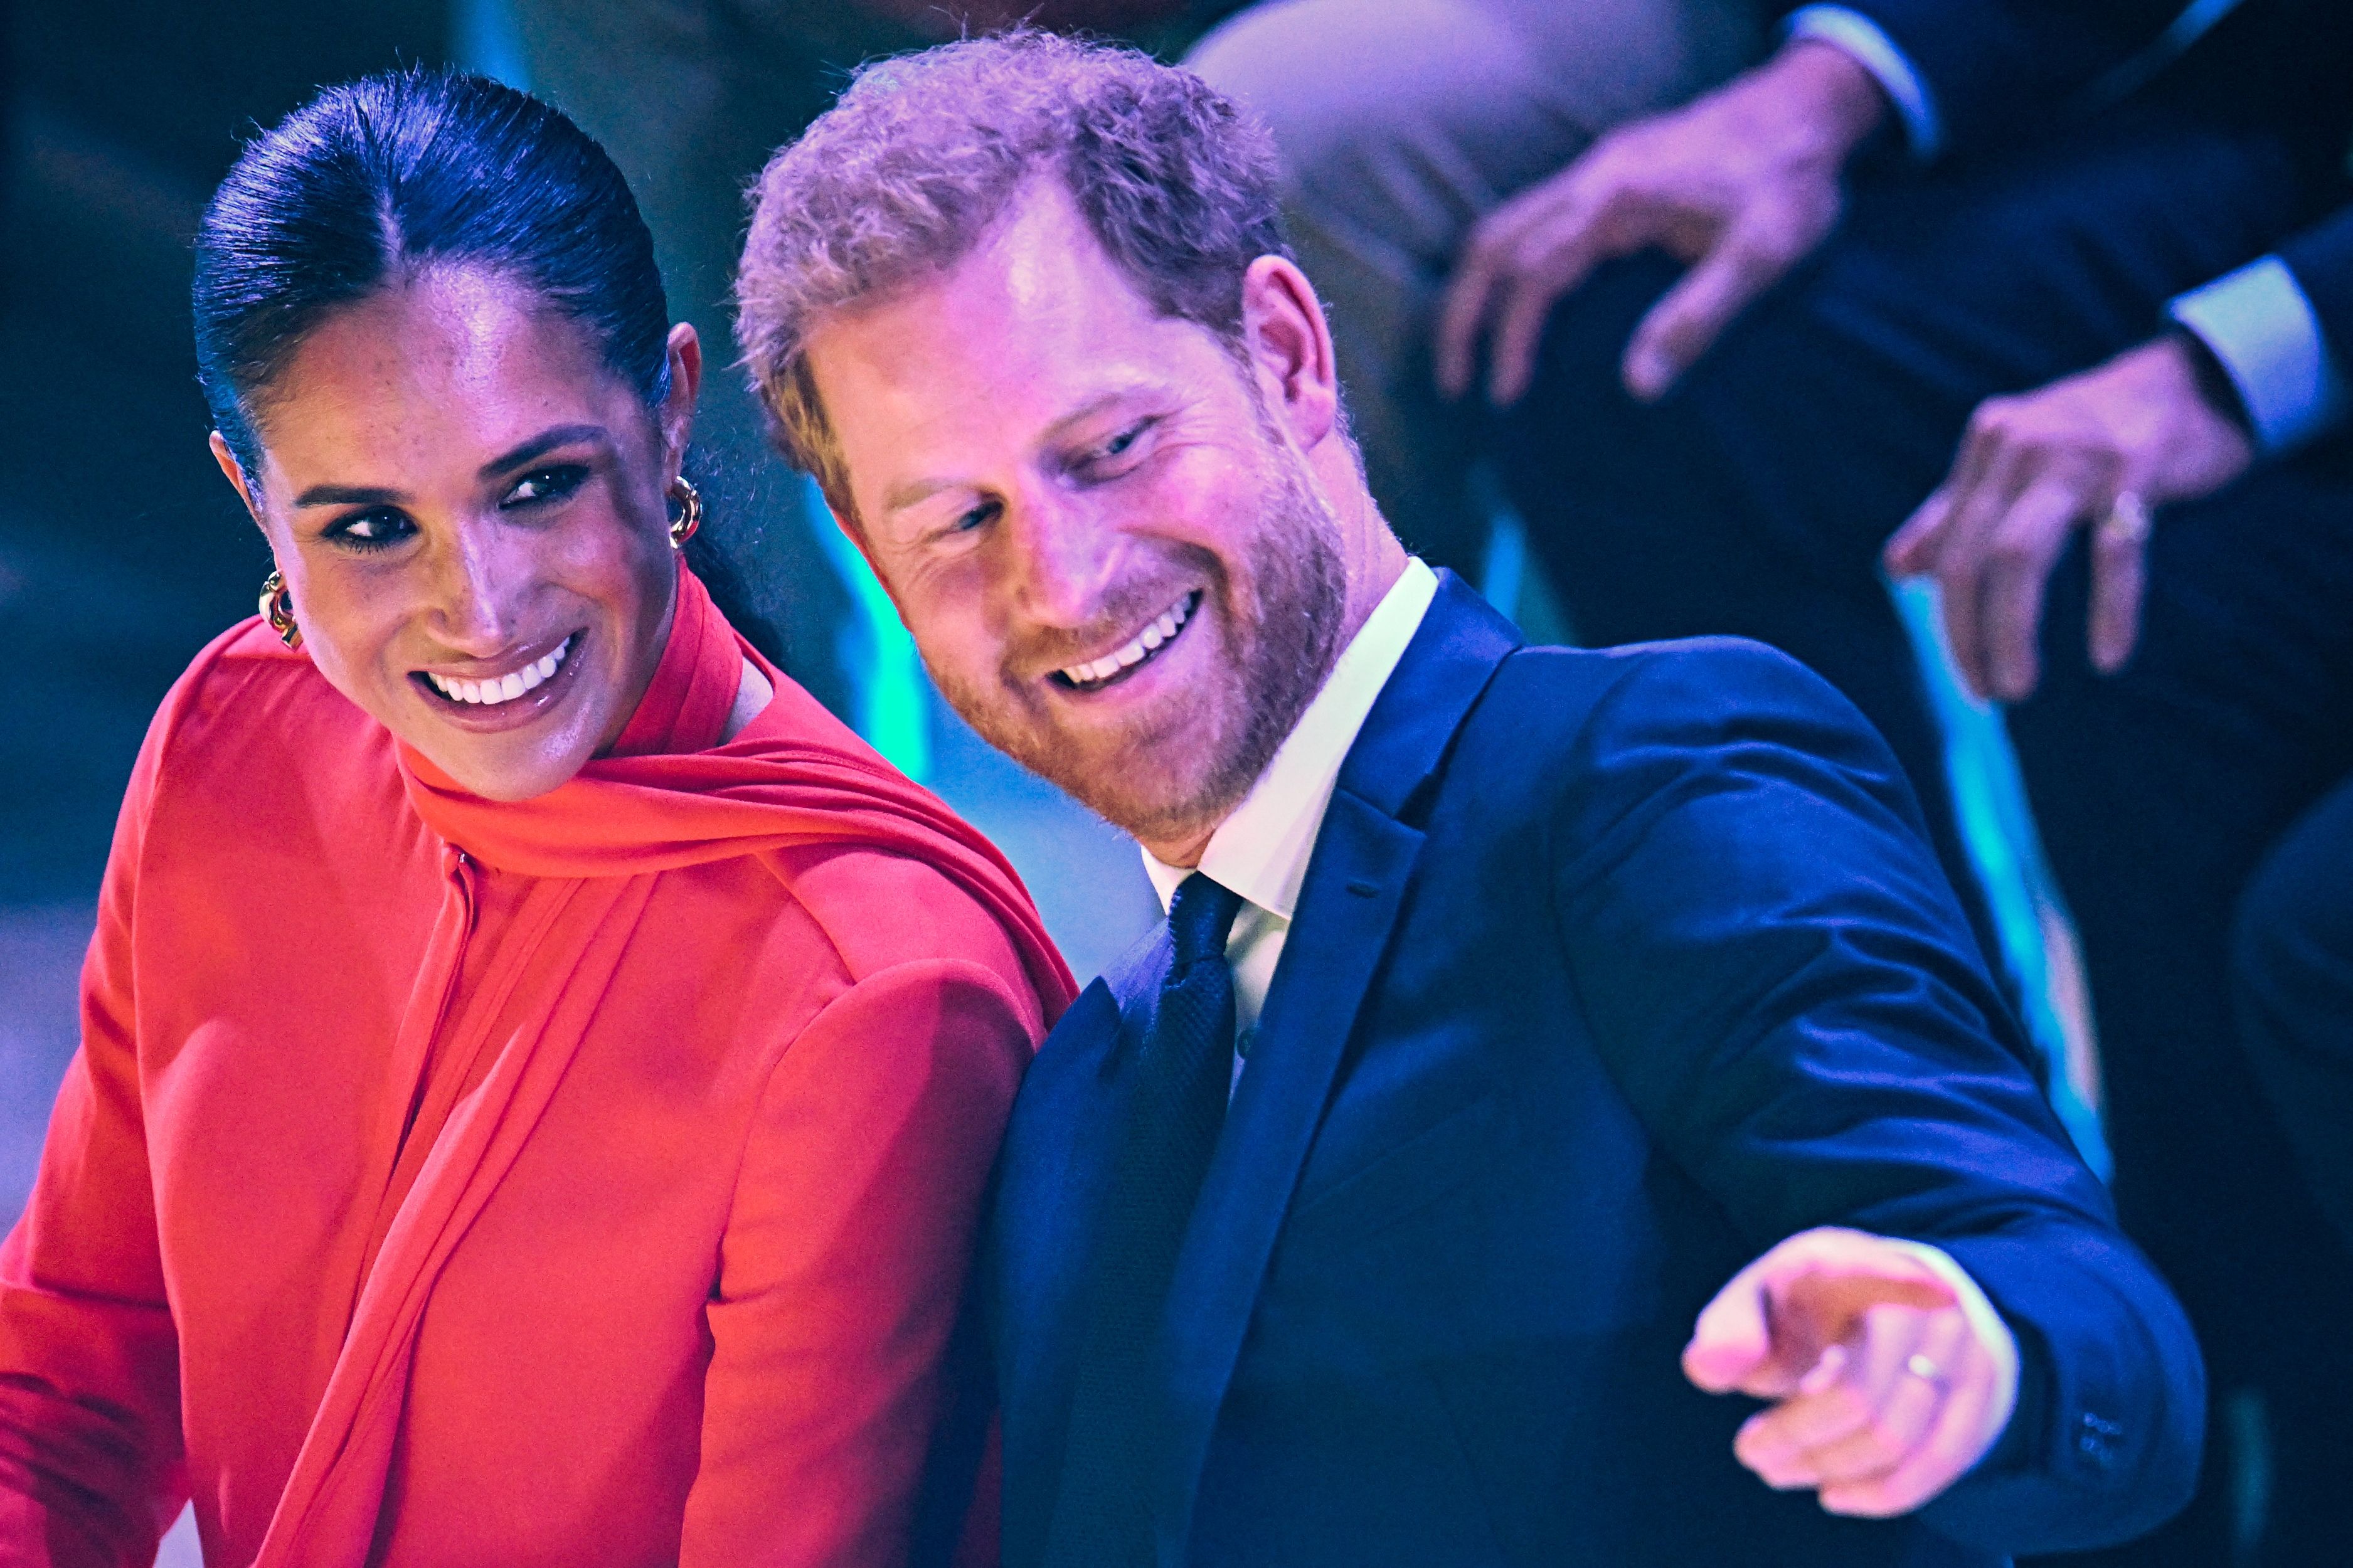 Meghan Markle and Prince Harry Will End Up With ‘Empty’ Lives ‘Built on a Foundation of Resentment’ Says Commentator